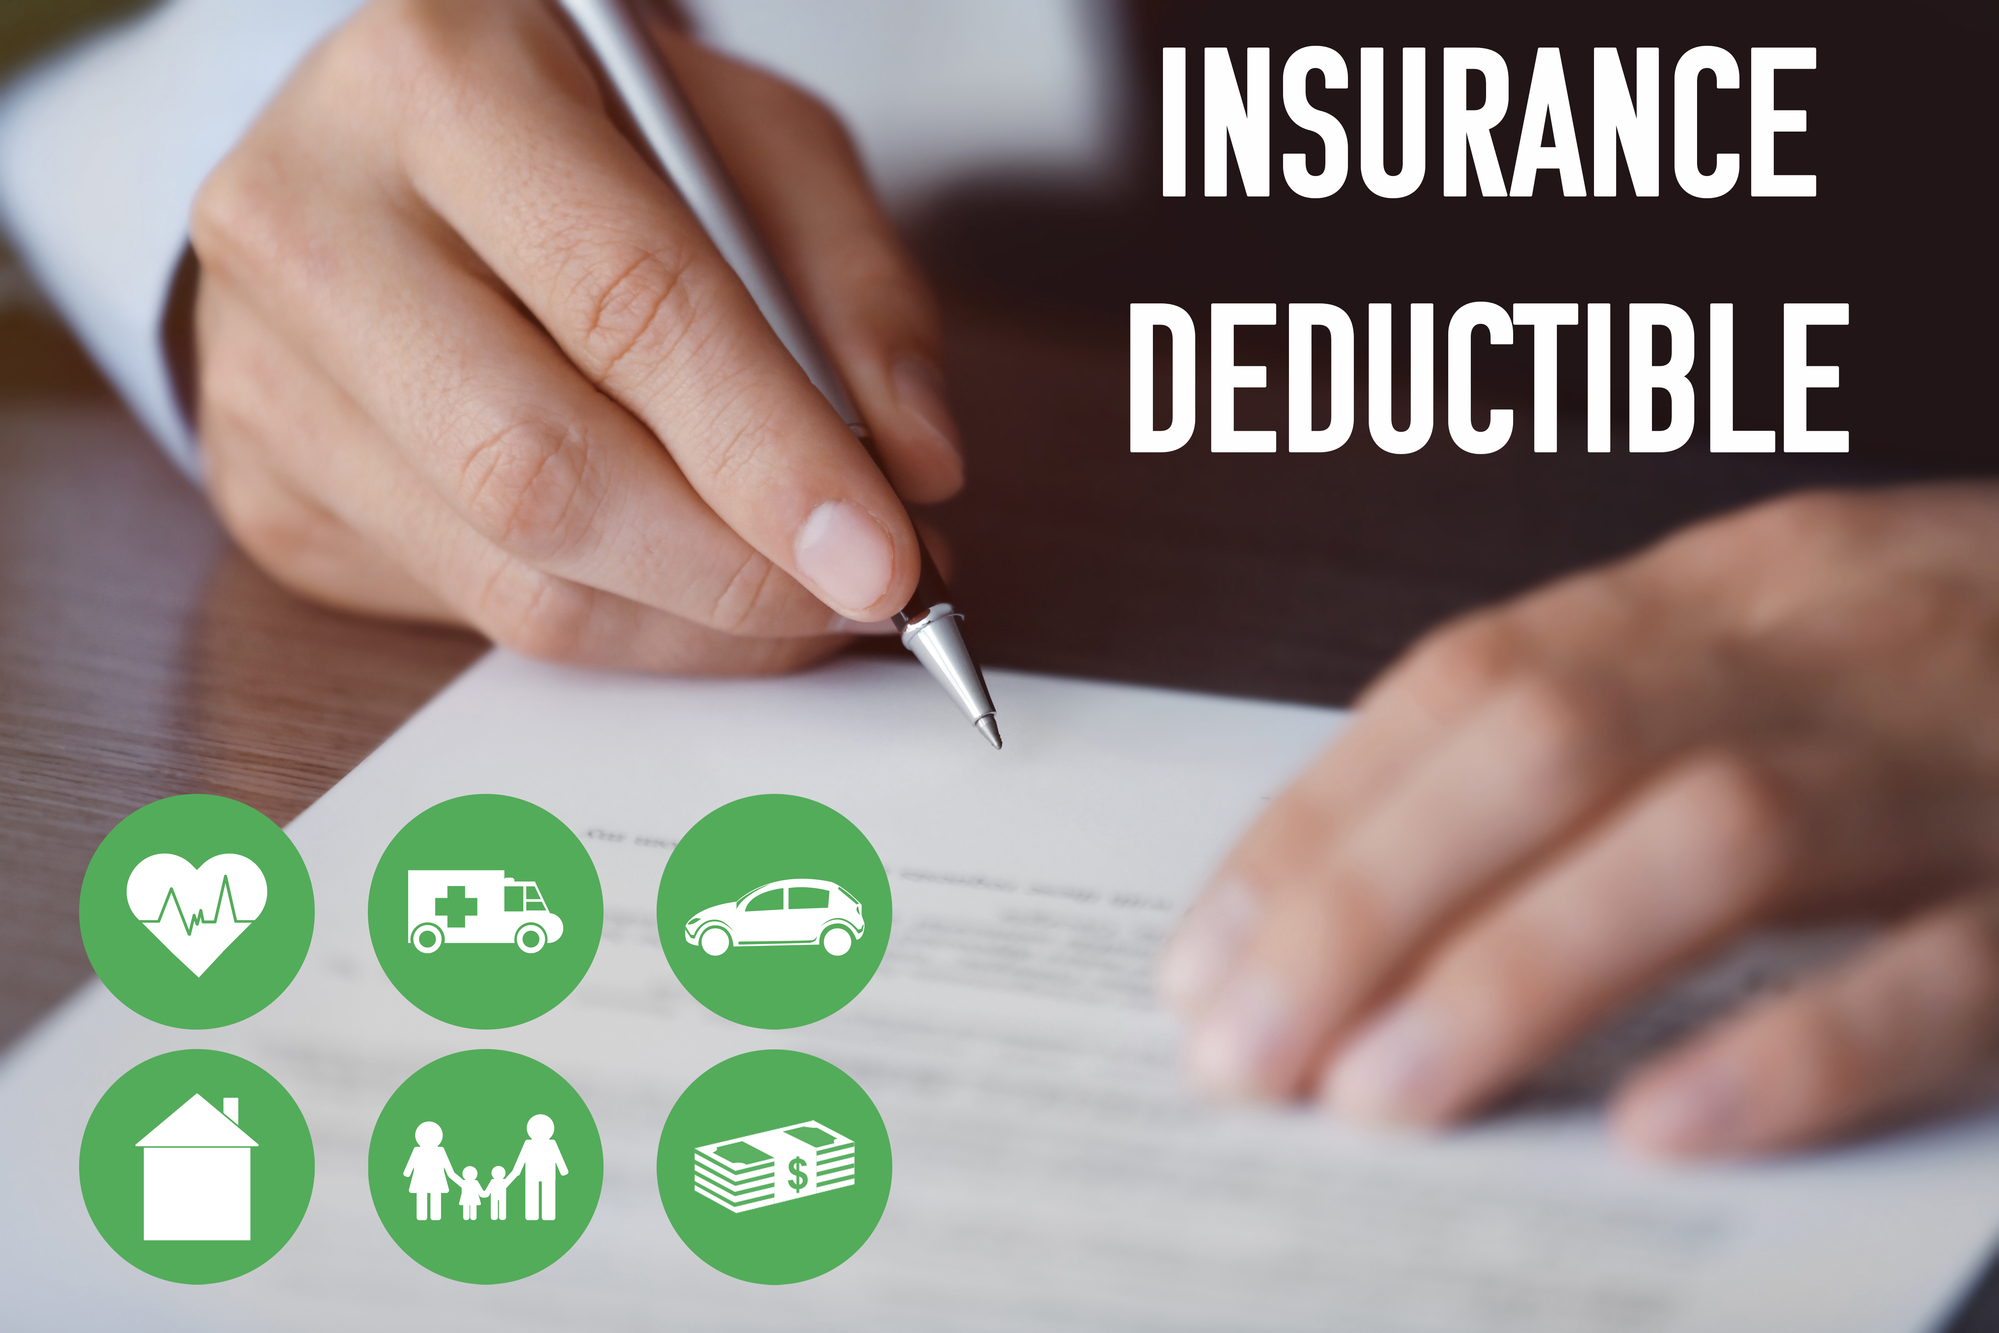 Should You Increase Your Insurance Deductible to Save Money